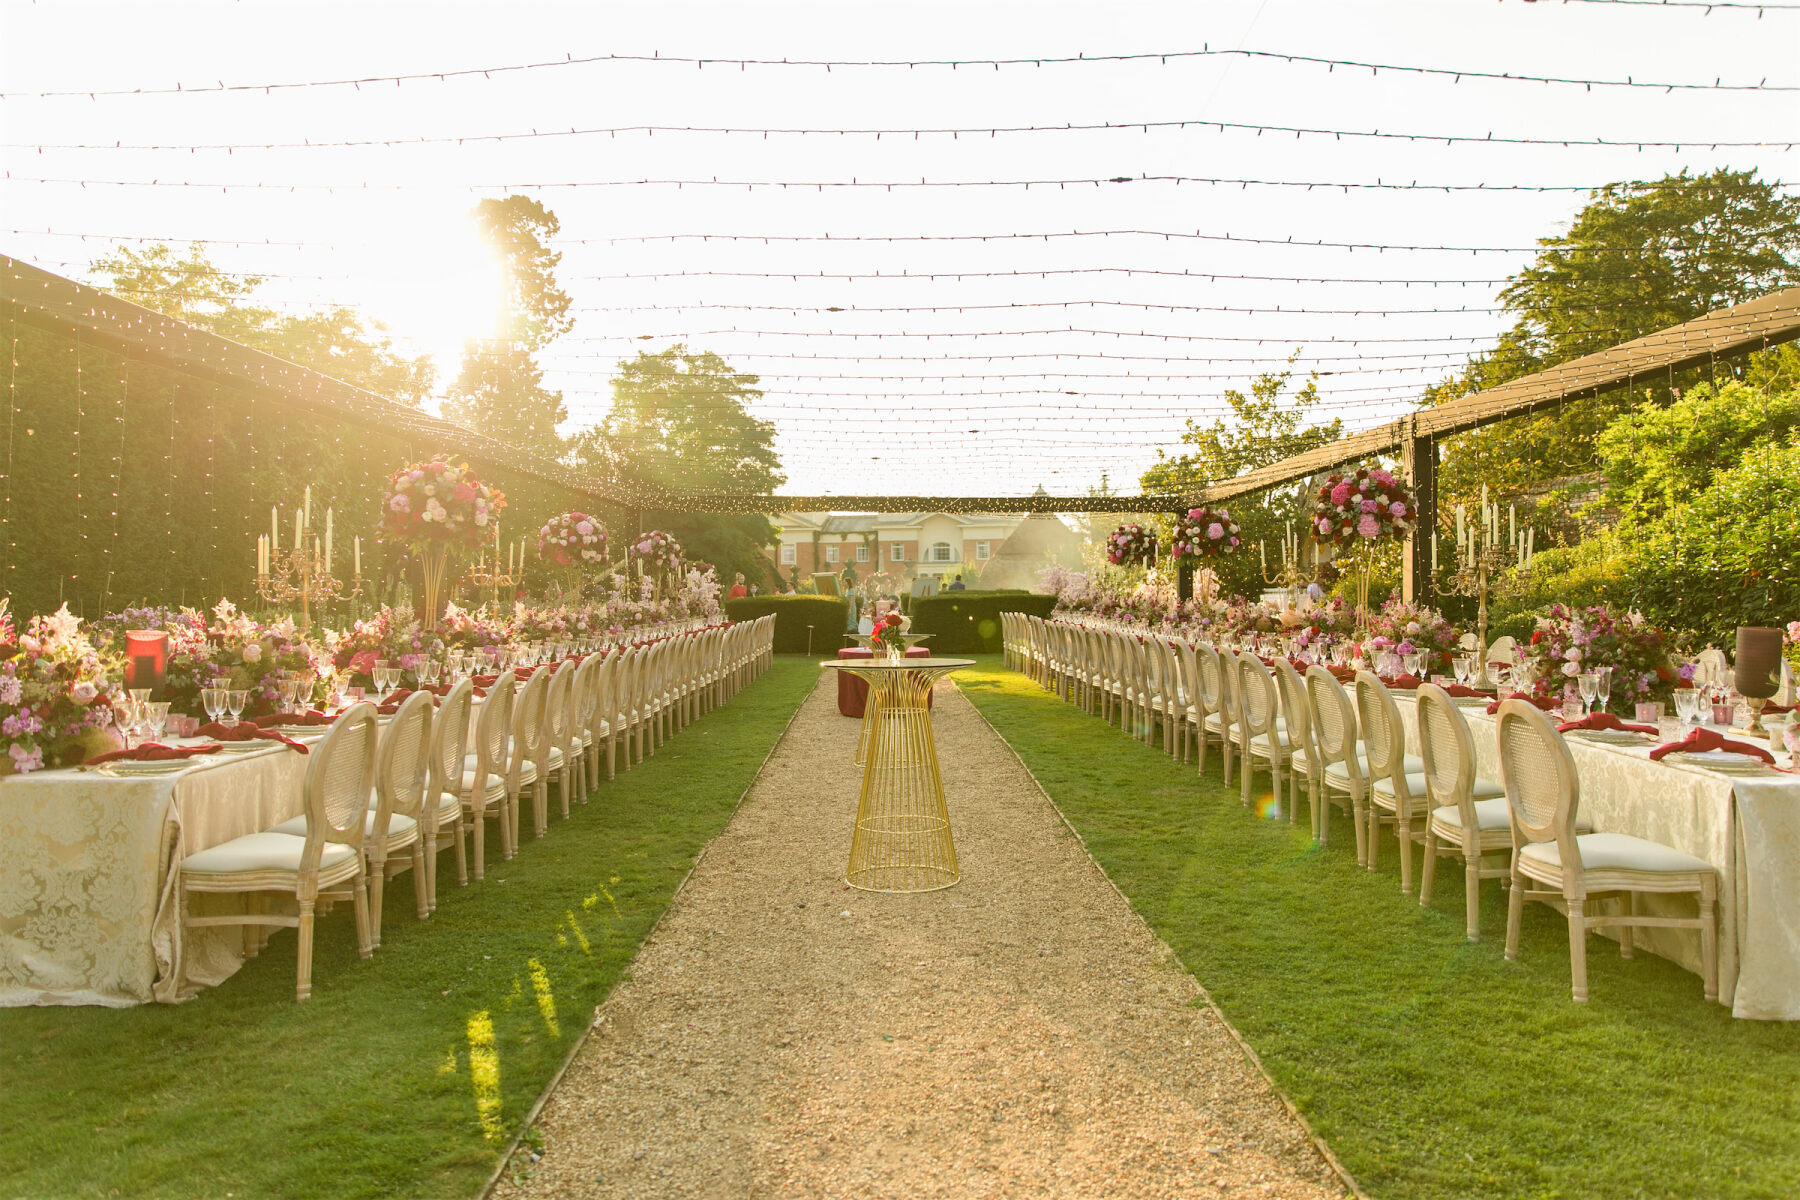 Two long tables set under string lights in the garden, were a romantic setting for a colorful countryside wedding.